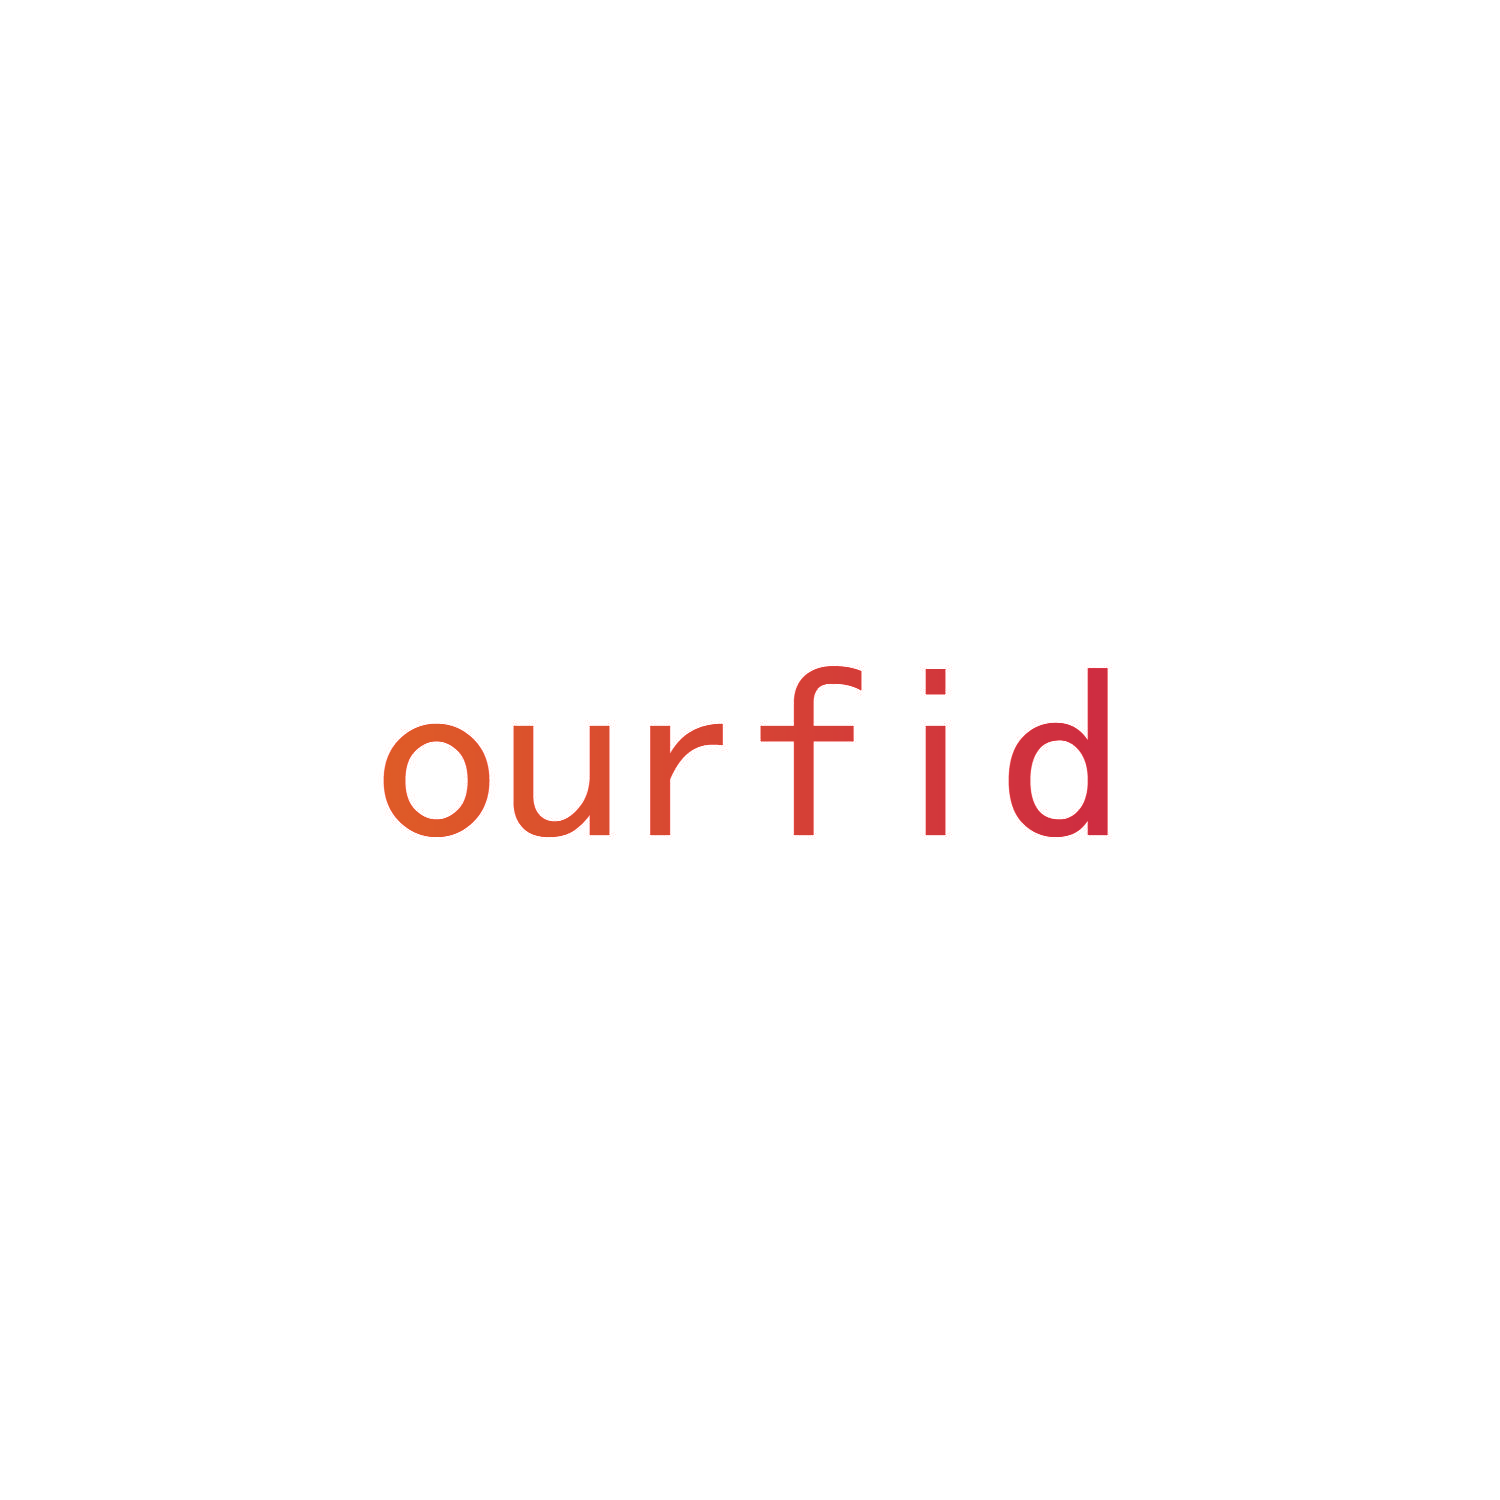 OURFID